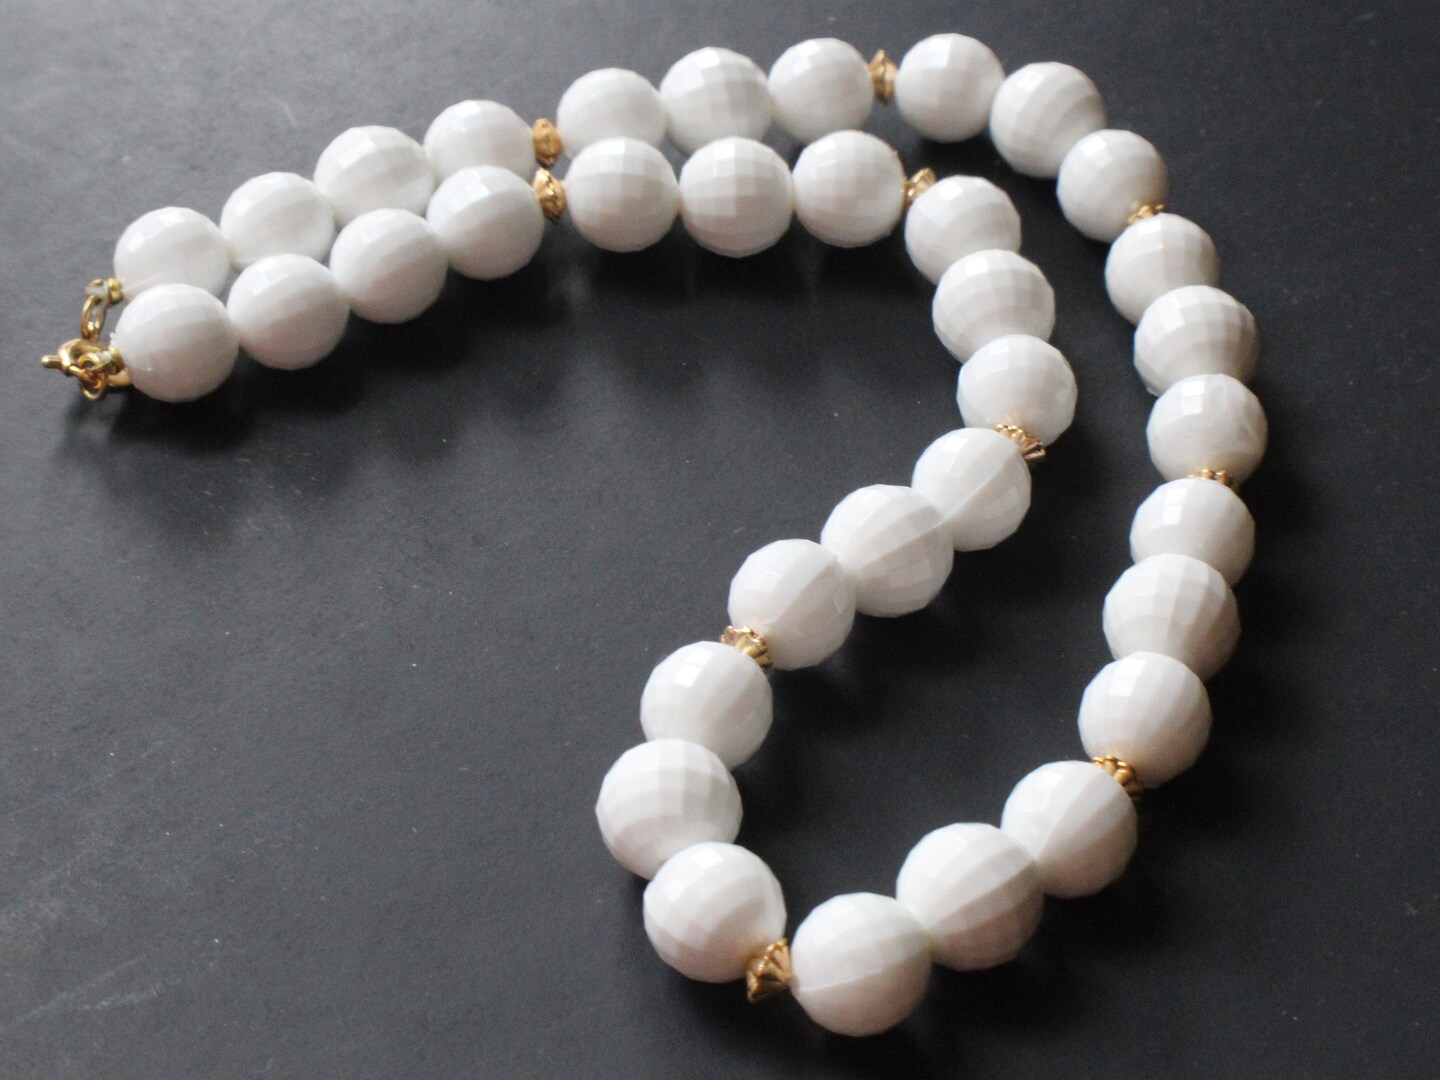 16 Inch Vintage Necklace White and Gold Beads Beaded Necklace New Old Stock Necklace